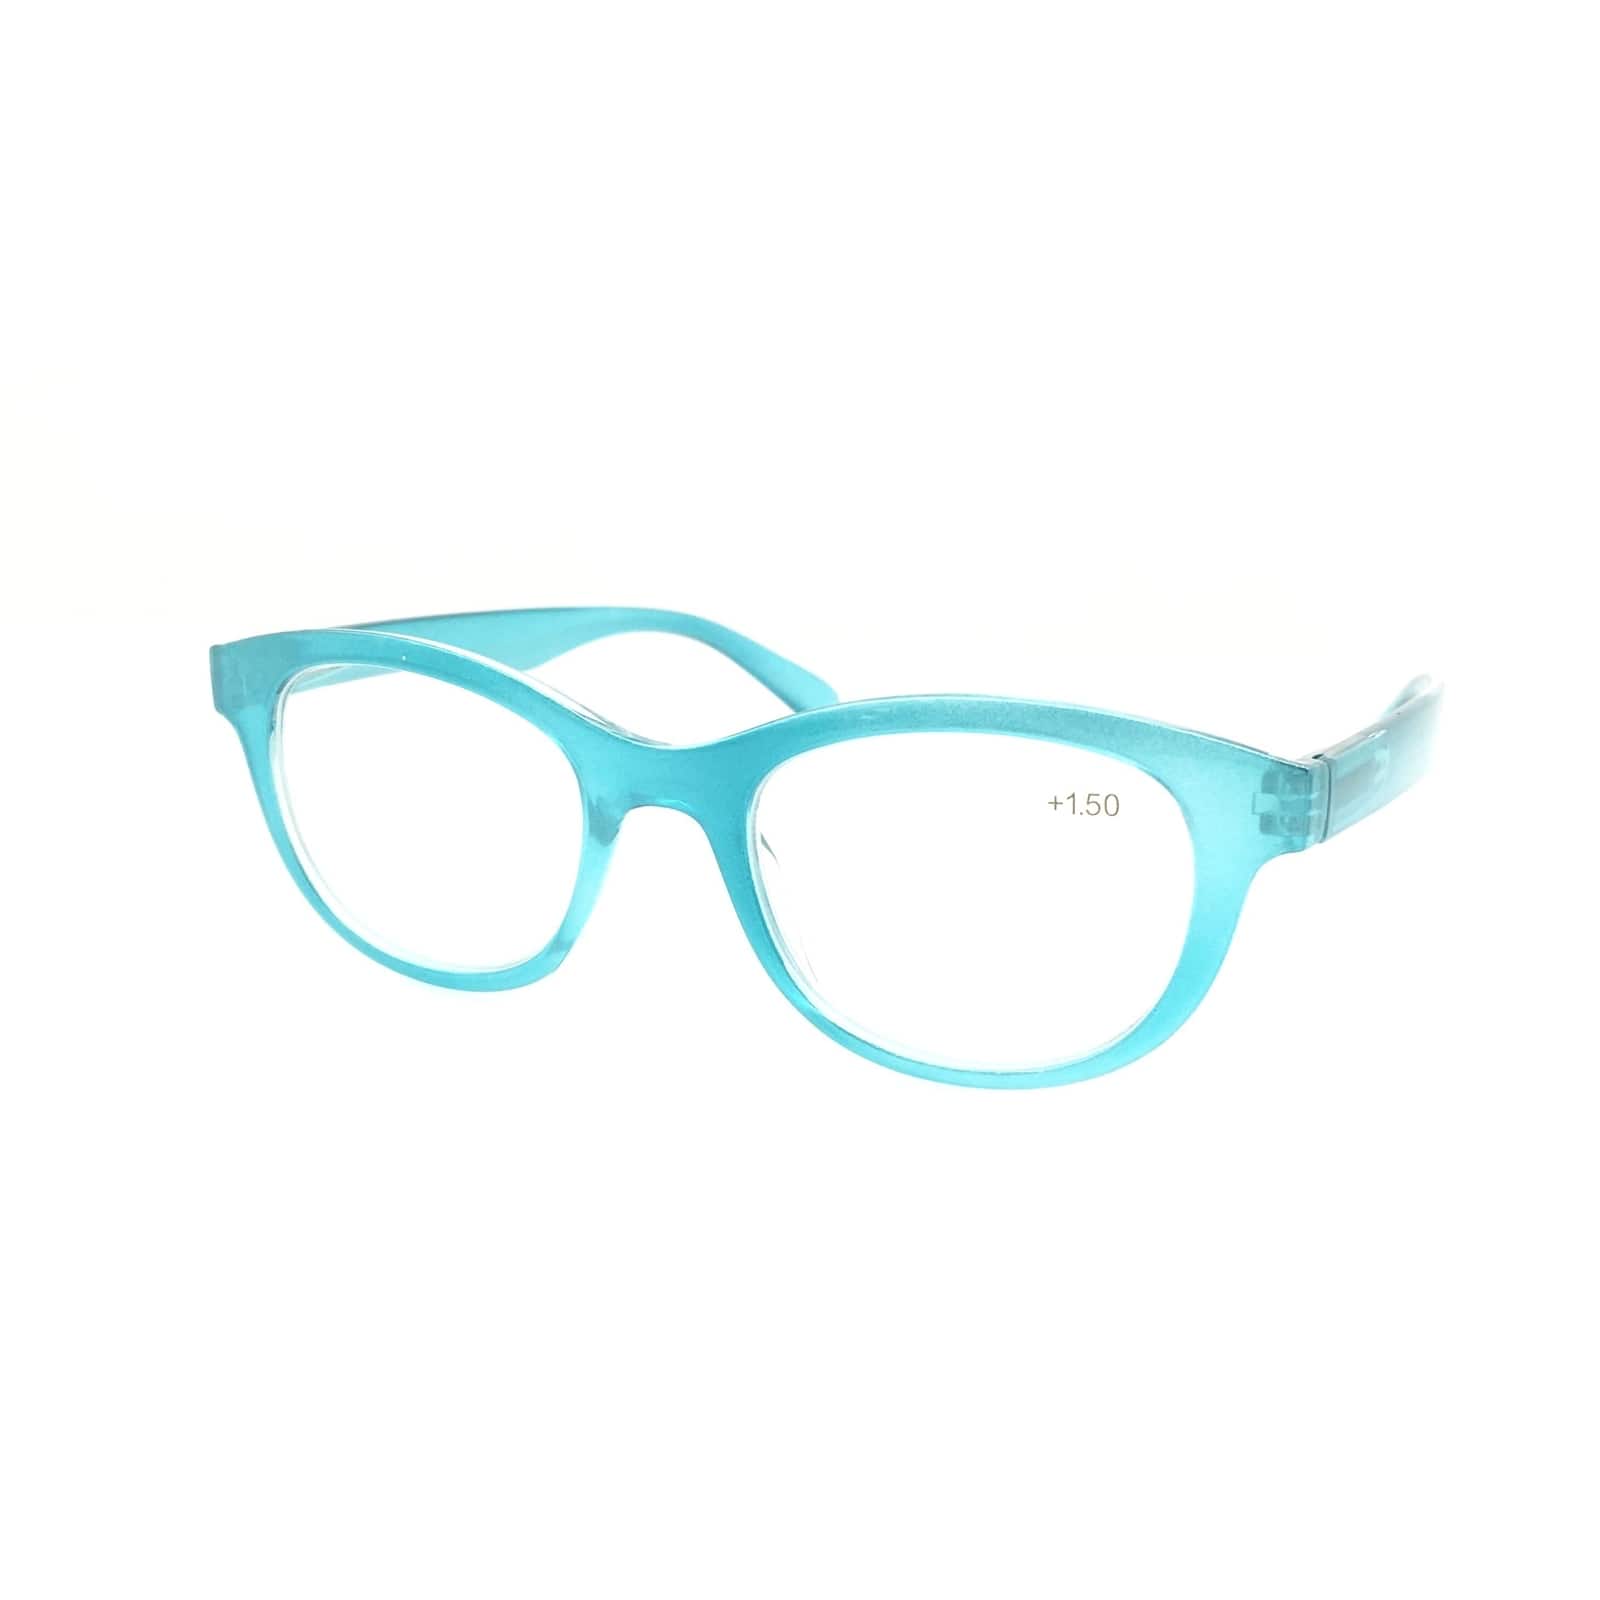 Buy the Trend Readers™ Turquoise Metallic Reading Glasses By Loops ...